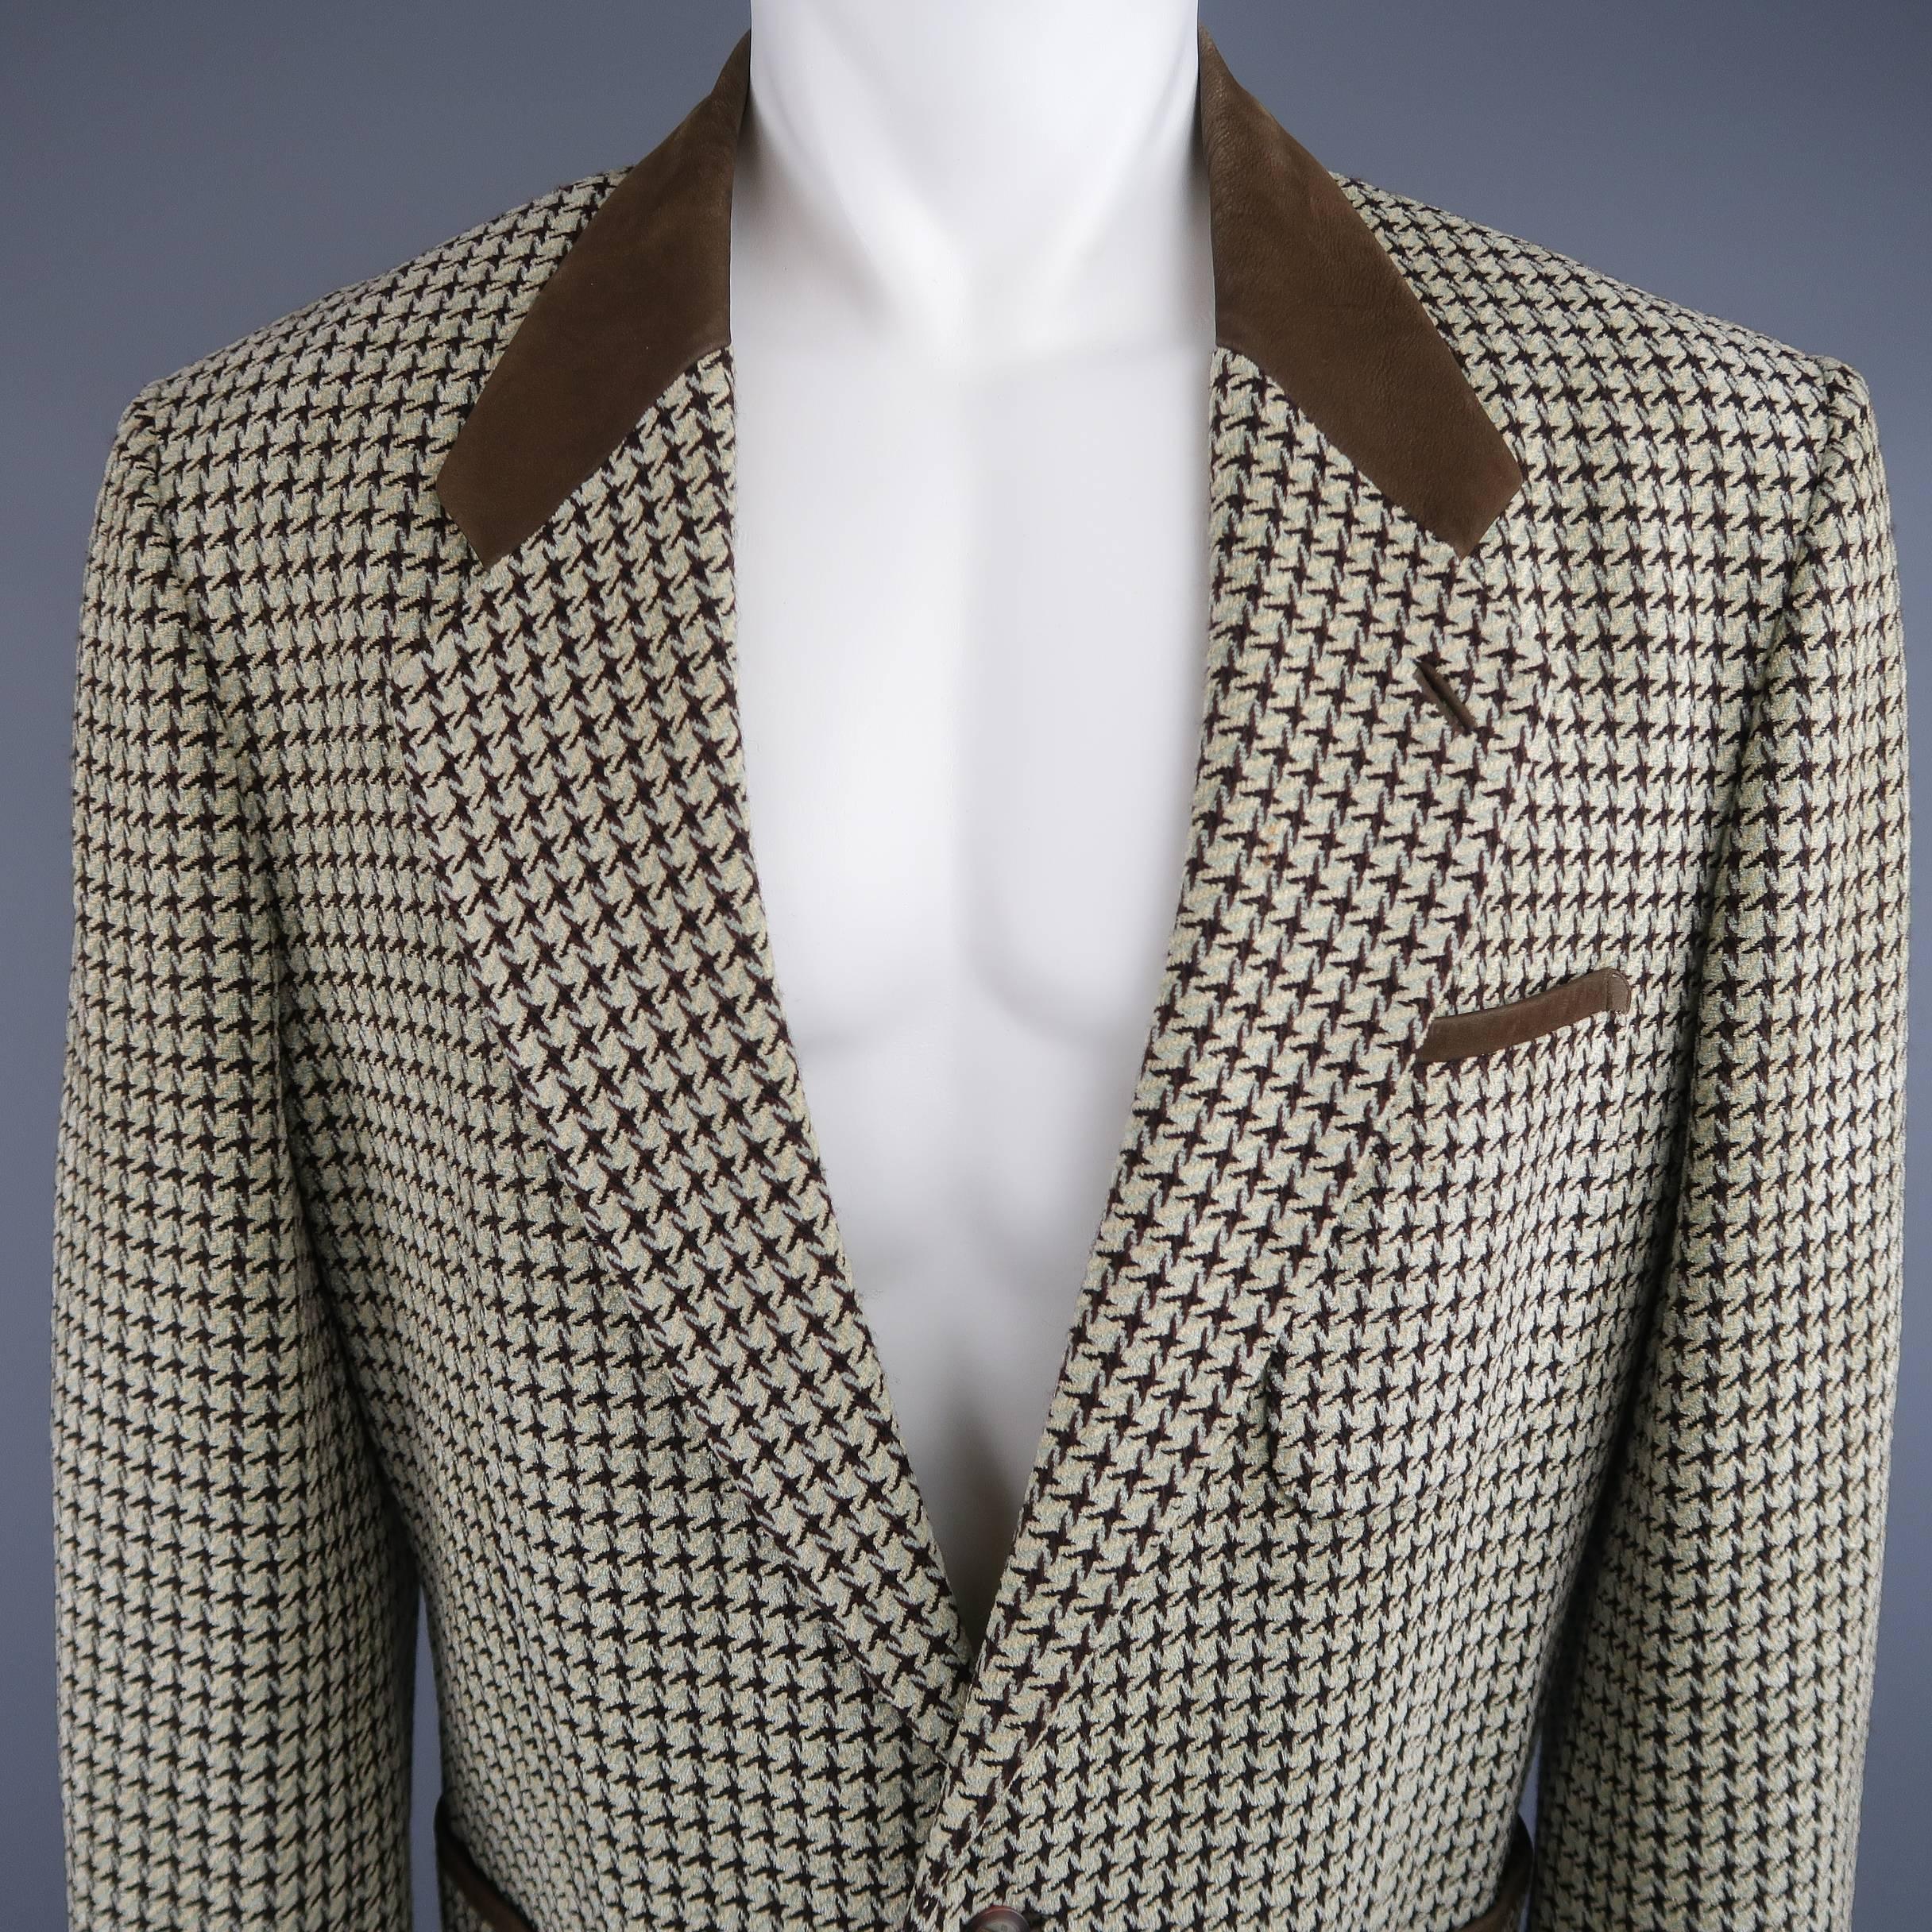 Vintage MATSUDA sport coat comes in muted mint green, beige, and chocolate brown houndstooth print wool and features a notch lapel with brown leather collar, two button closure, and patch pockets with leather trim. Made in Japan.
 
Good Pre-Owned